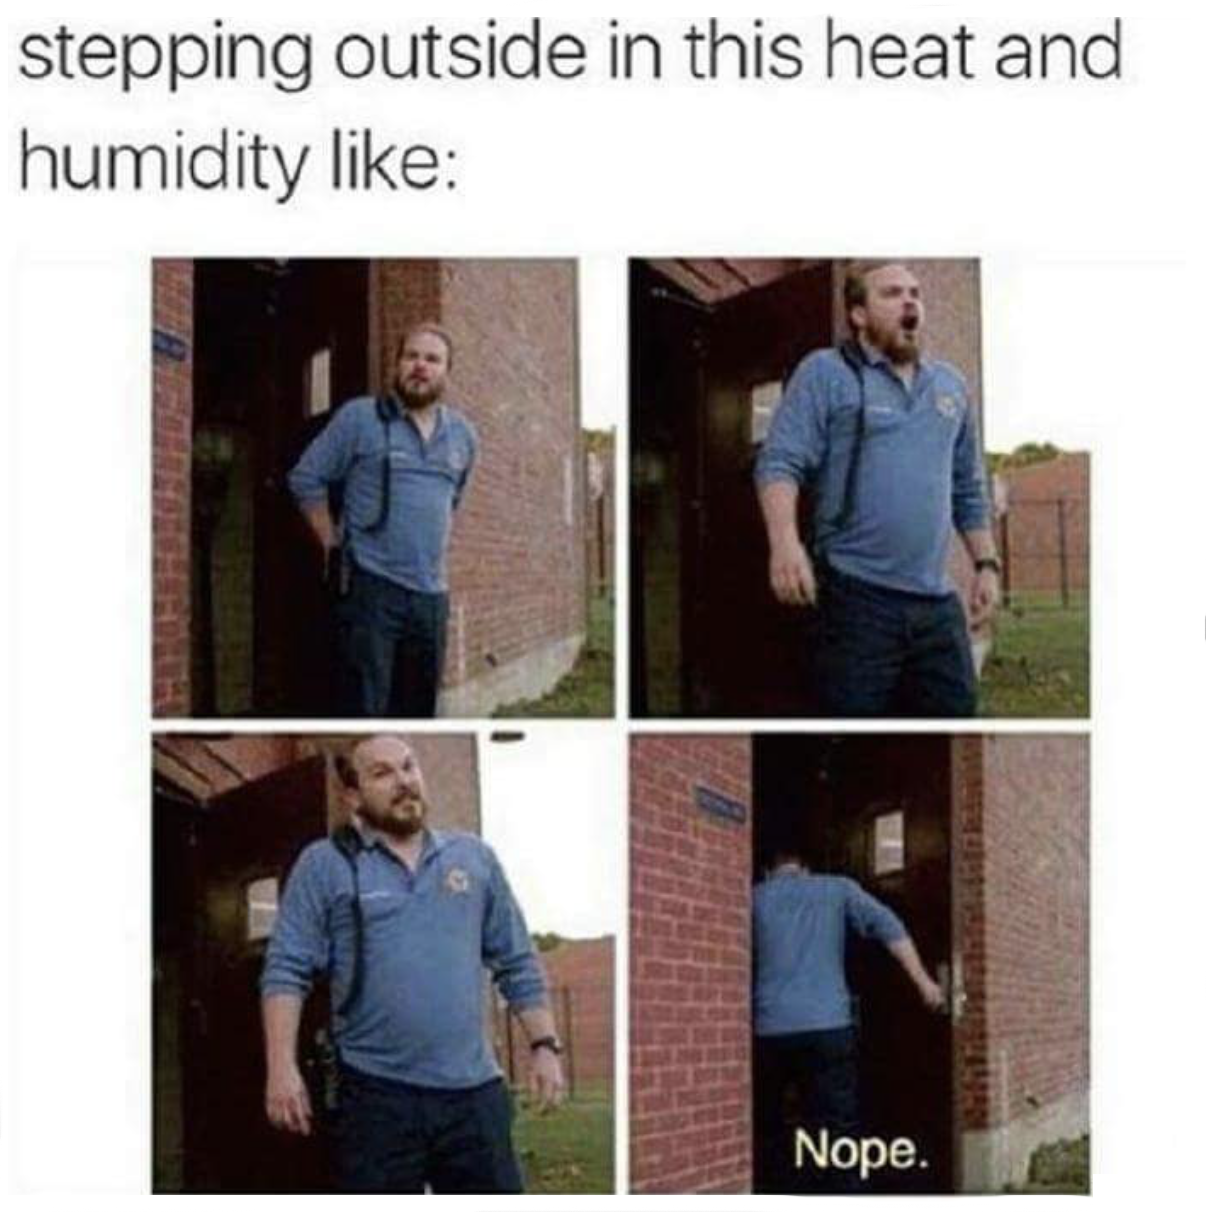 summer heat meme - stepping outside in this heat and humidity Nope.